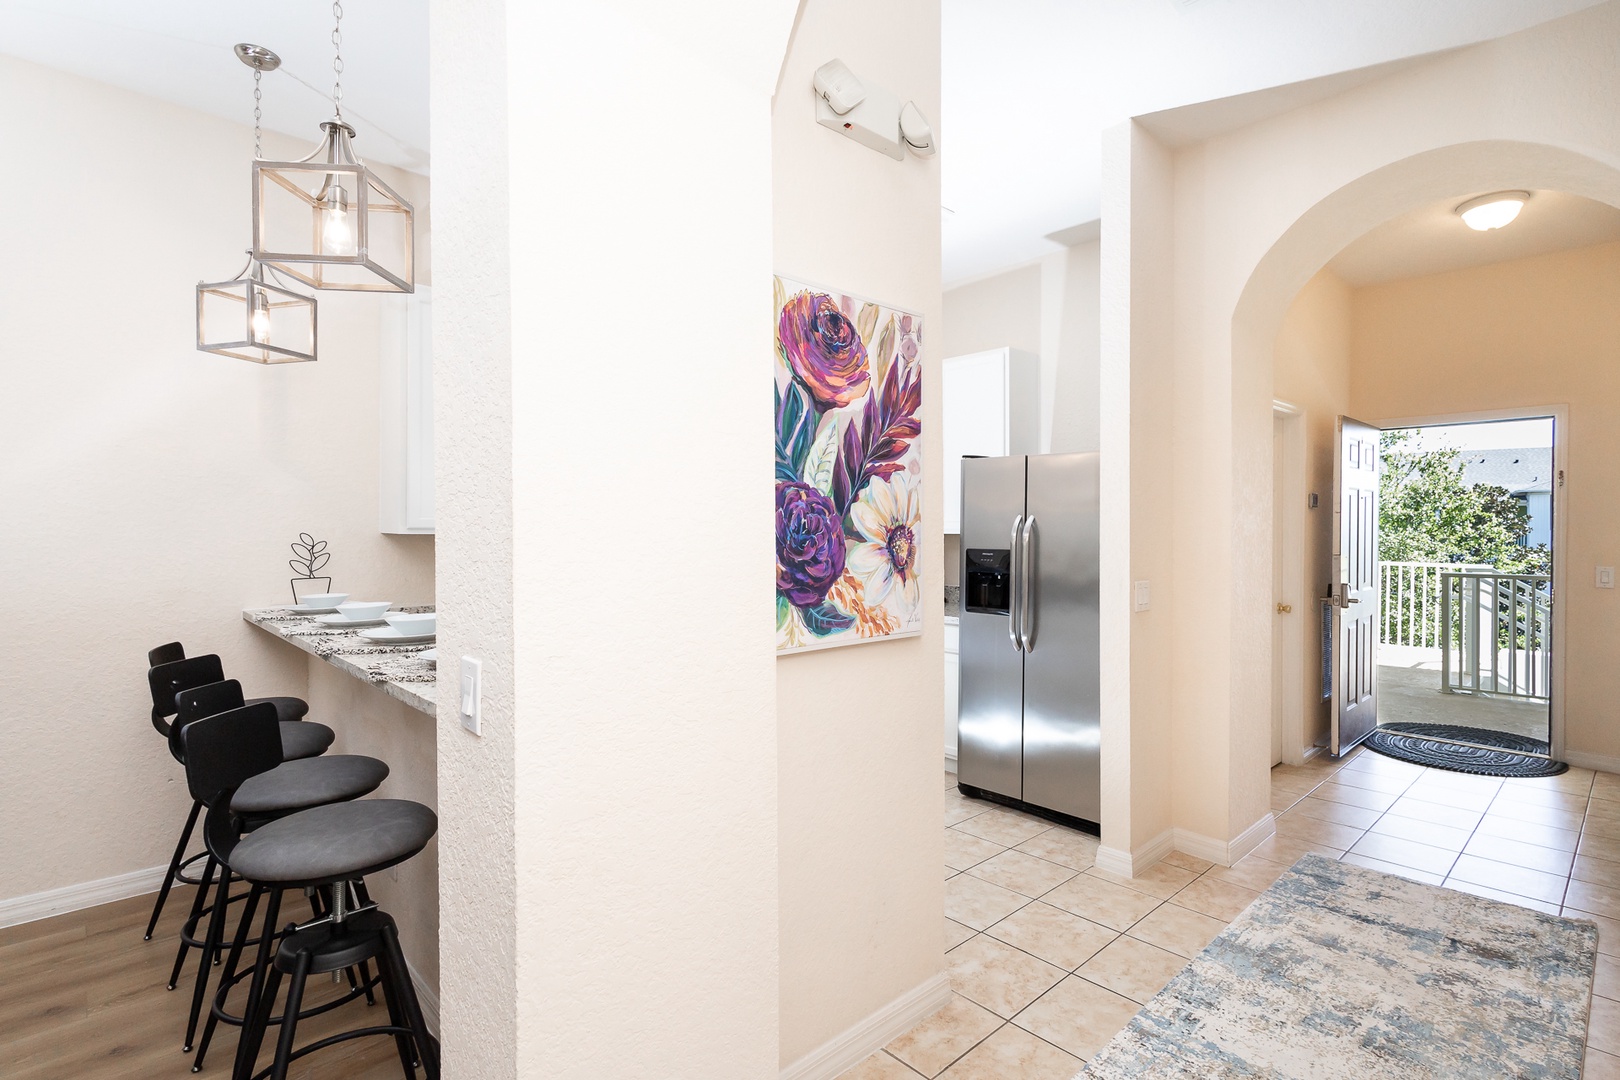 The breezy, open kitchen offers ample space & all the comforts of home